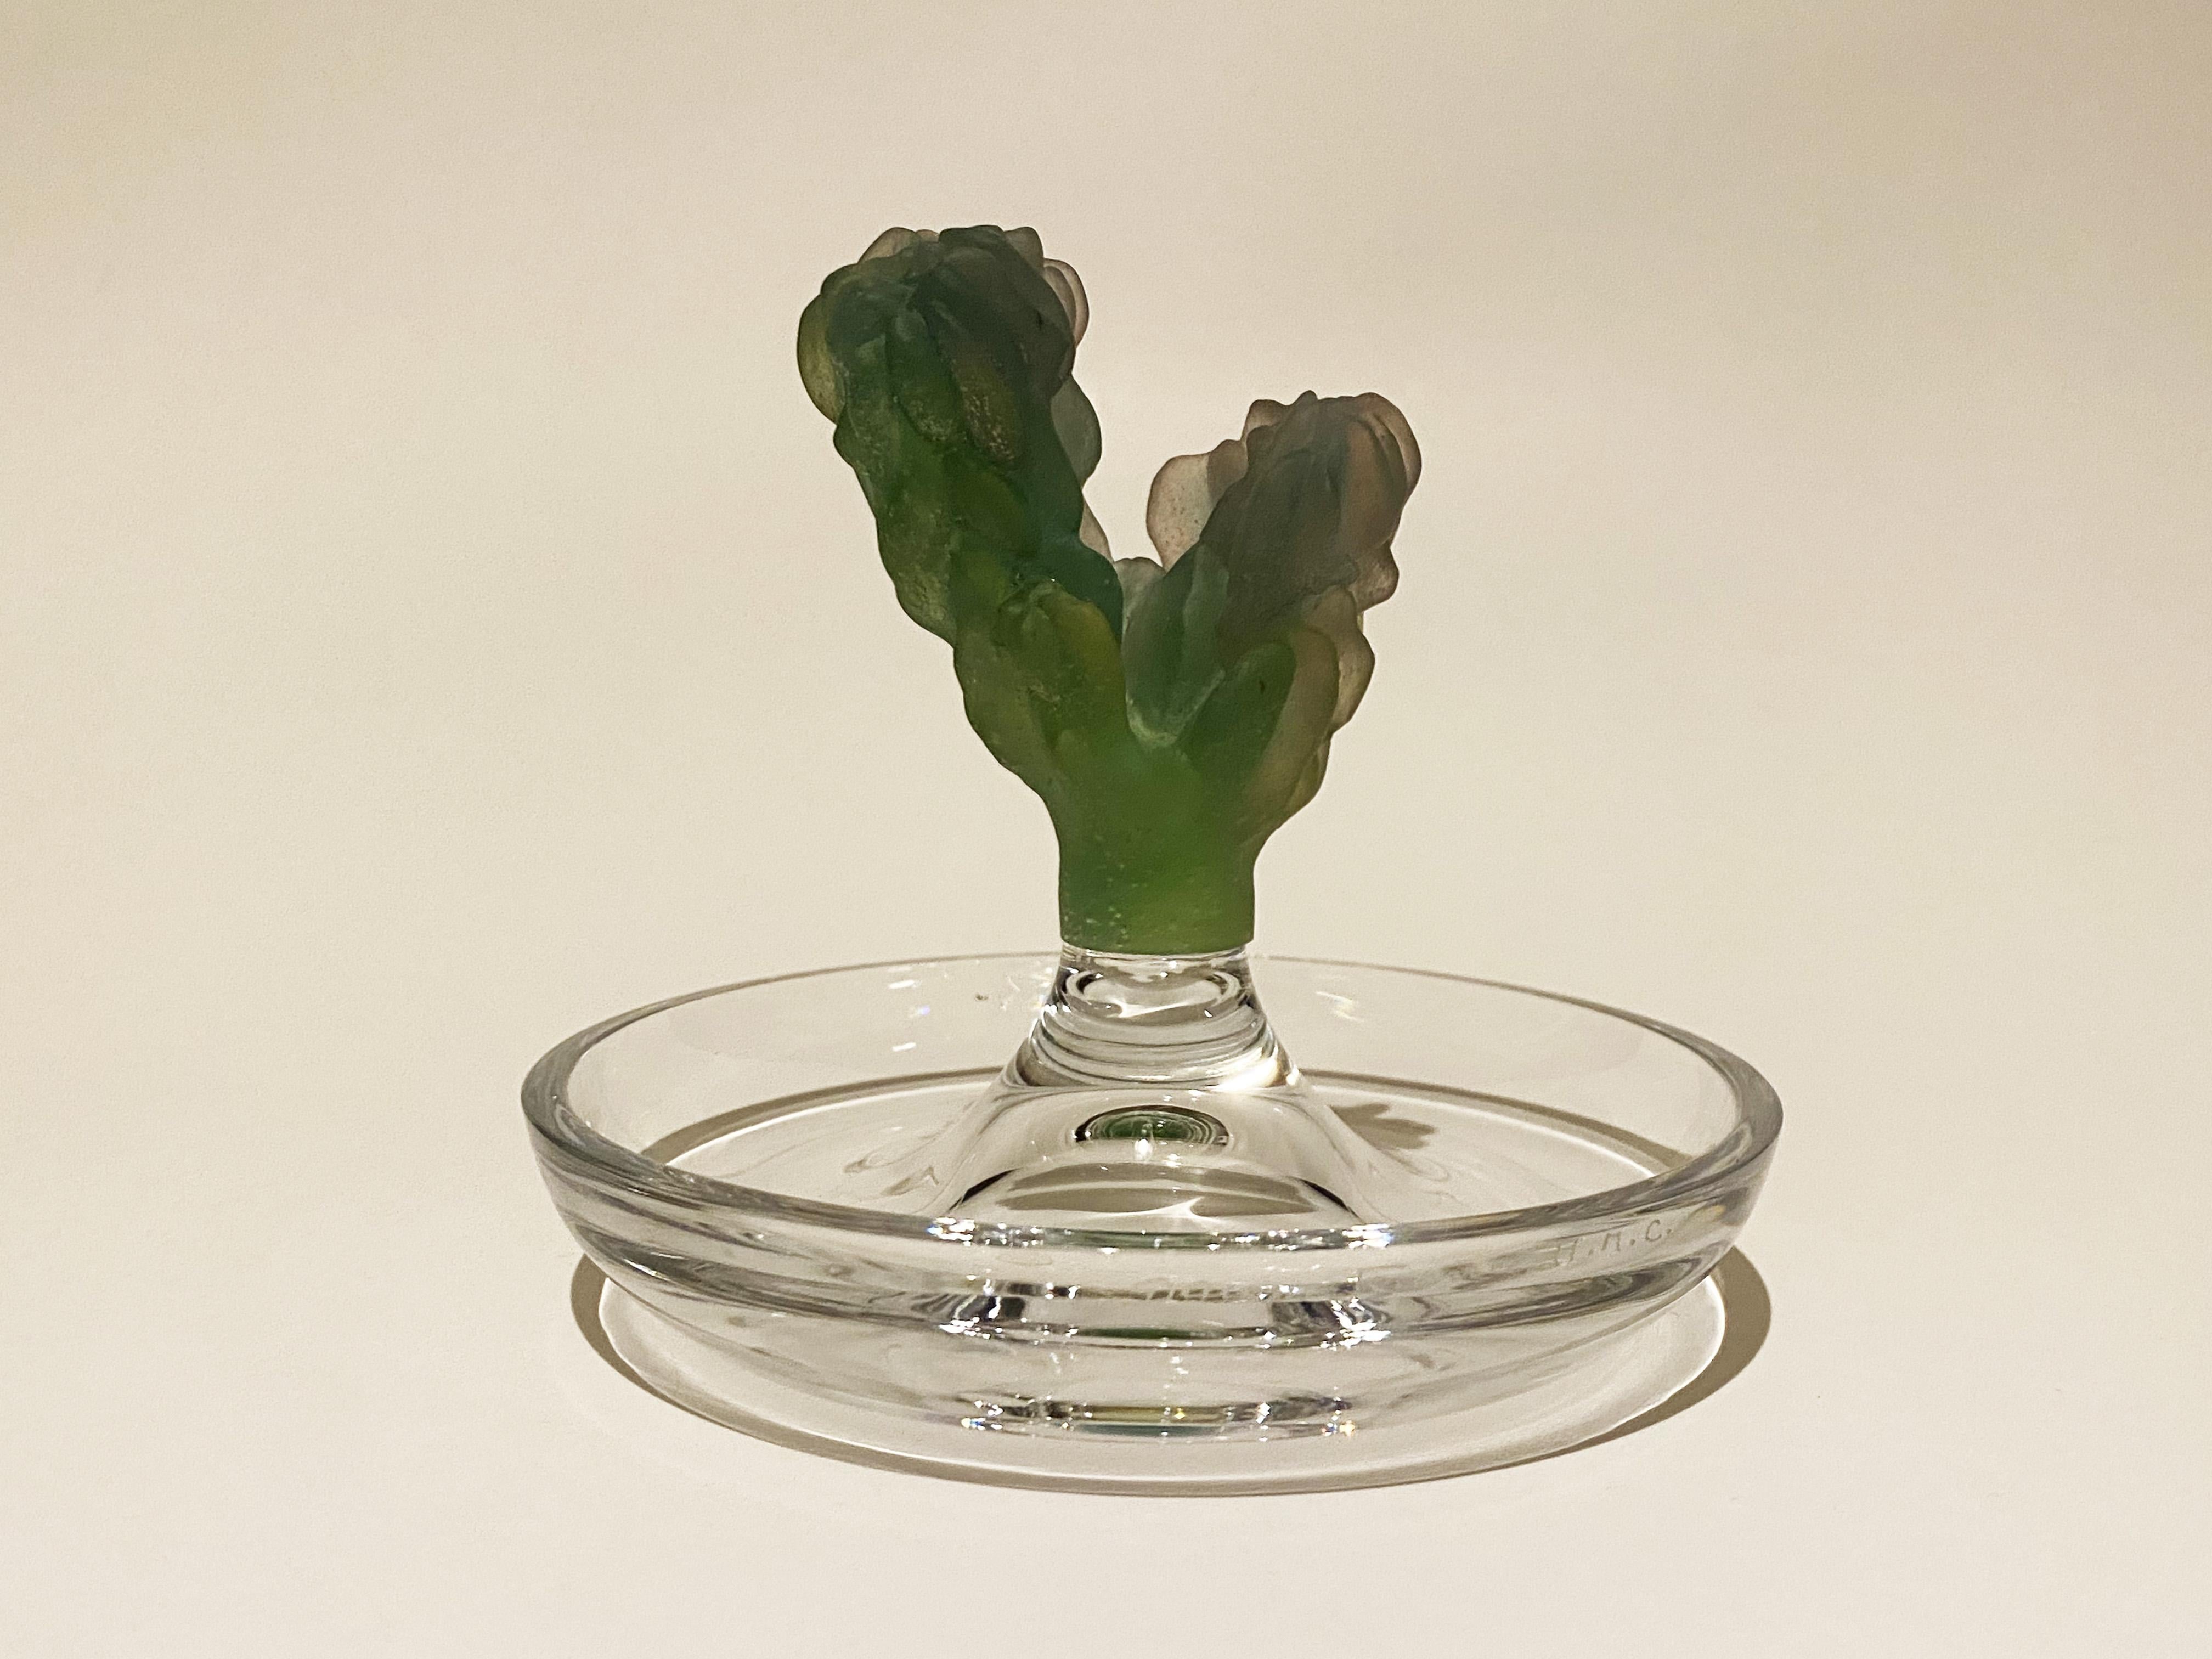 Cactus Pin Tray by Hilton McConnico for Daum.
Signed Daum and HMC.
Boxed.